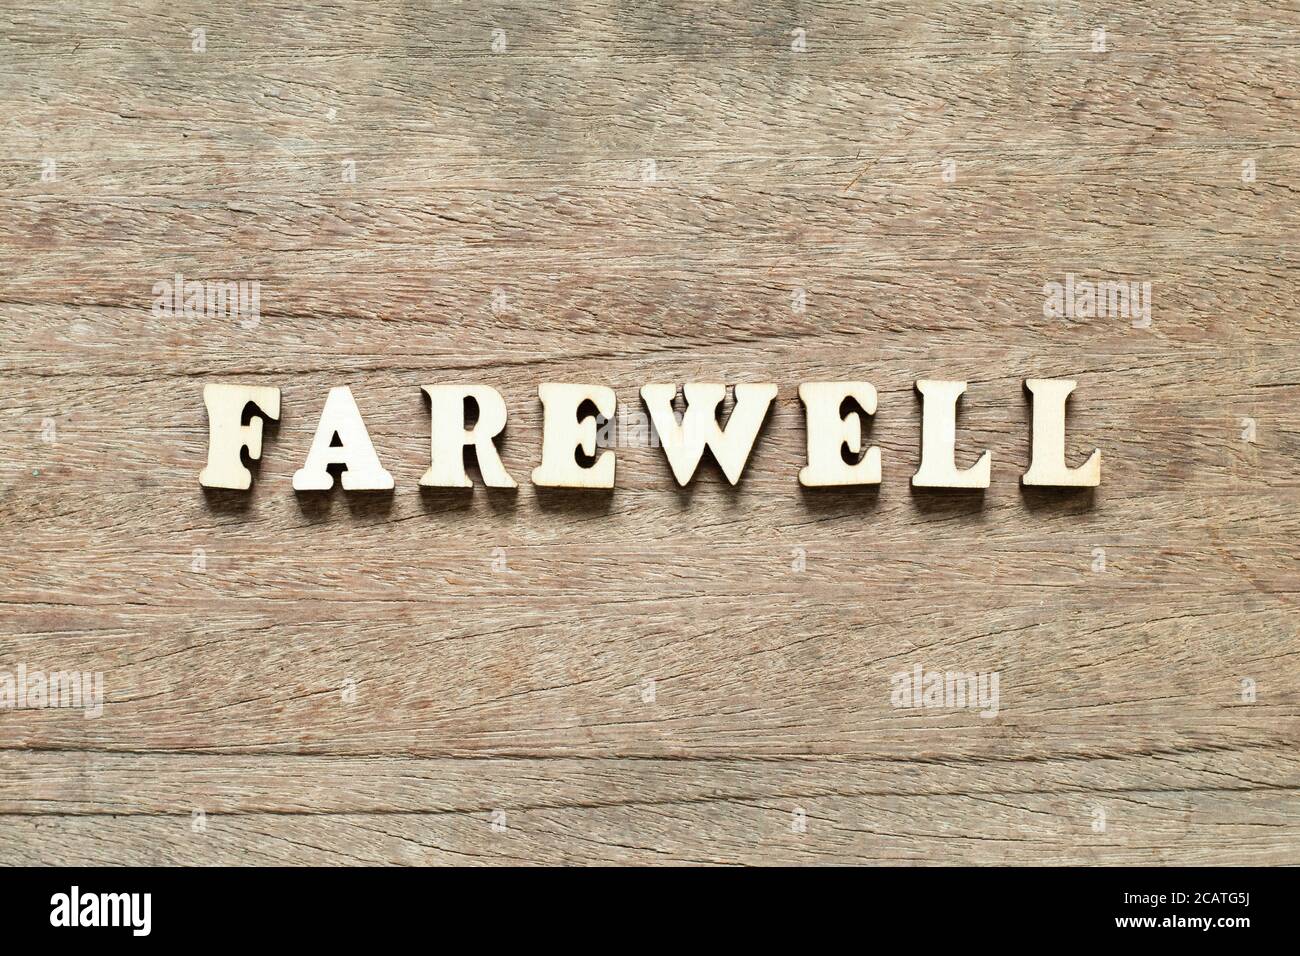 Alphabet letter block in word farewell on wood background Stock Photo